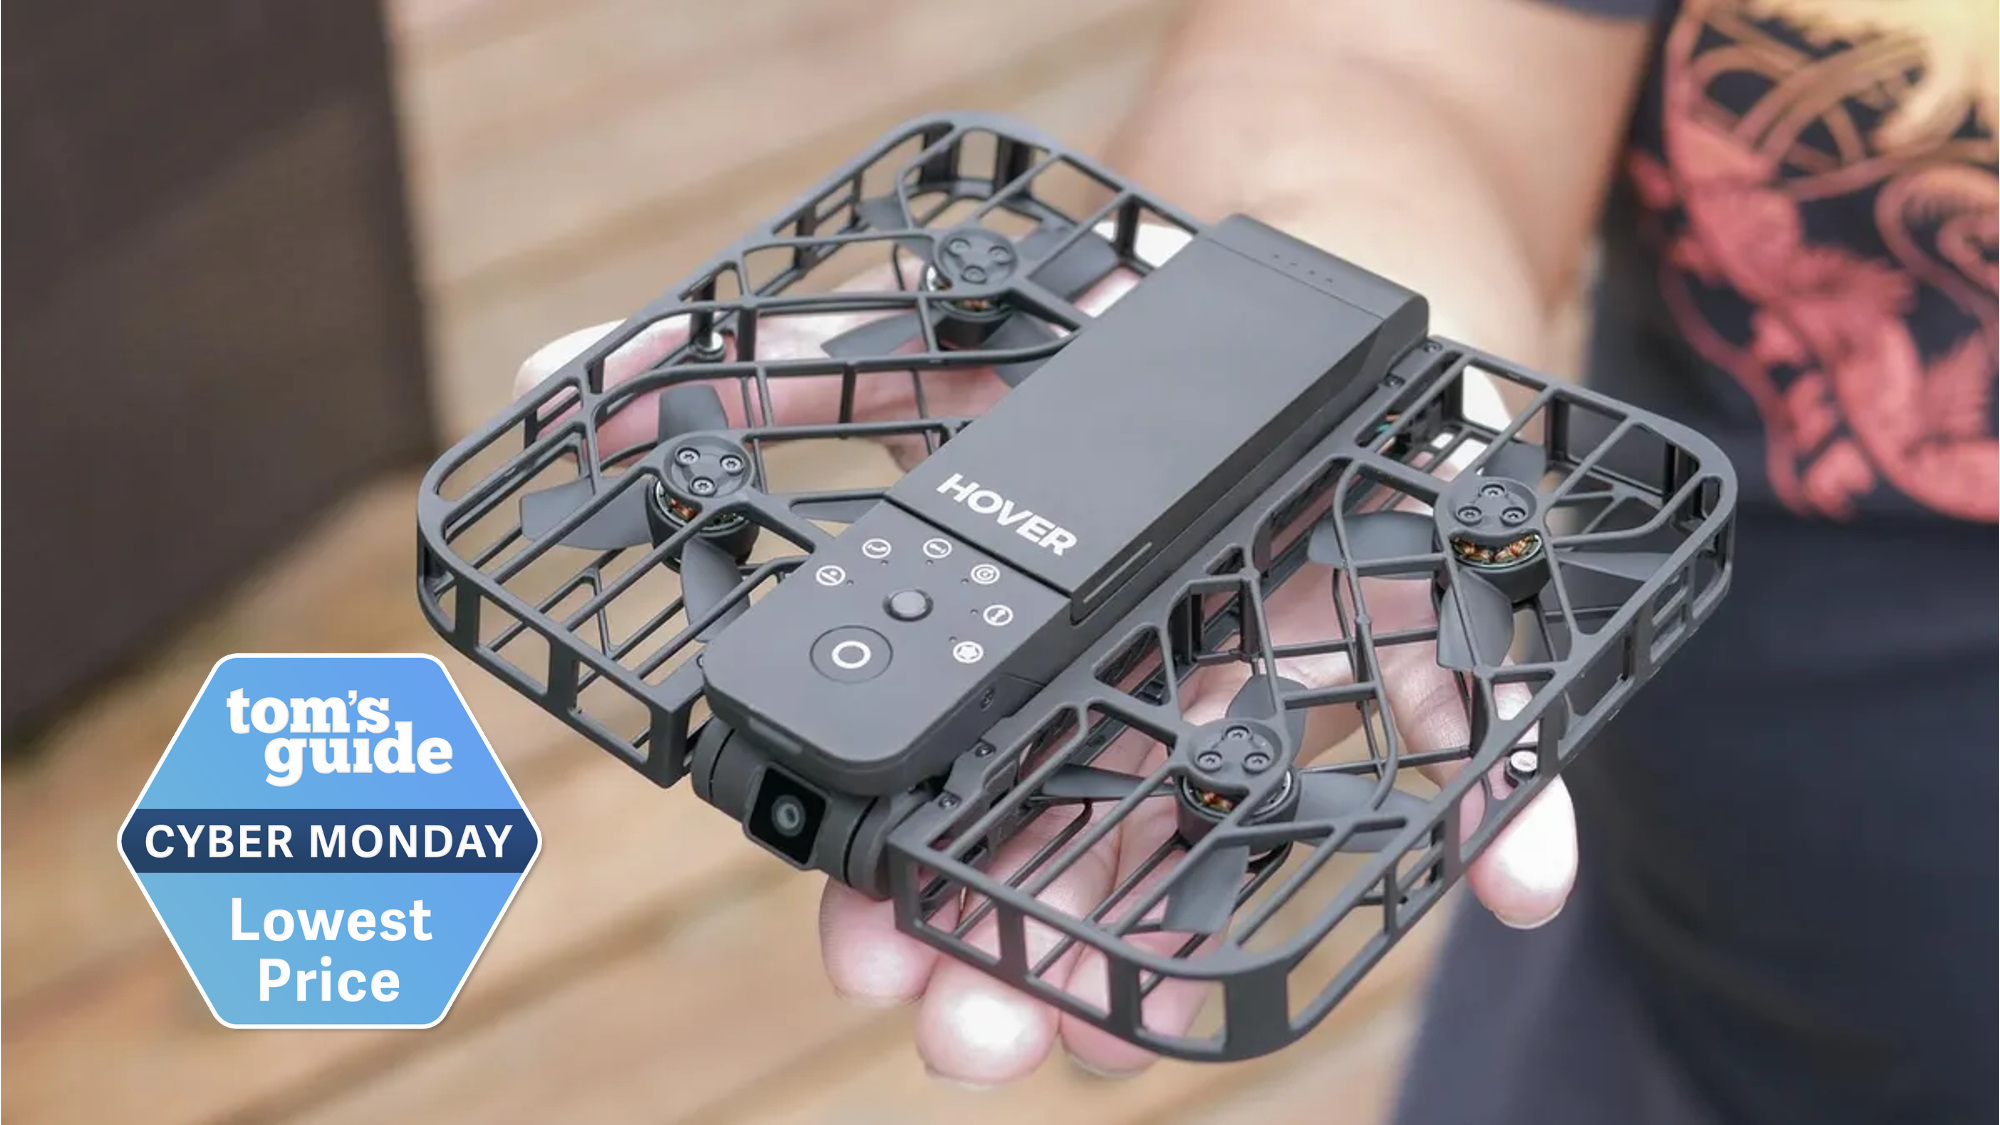 Forget DJI — my favorite folding drone is back to its all-time